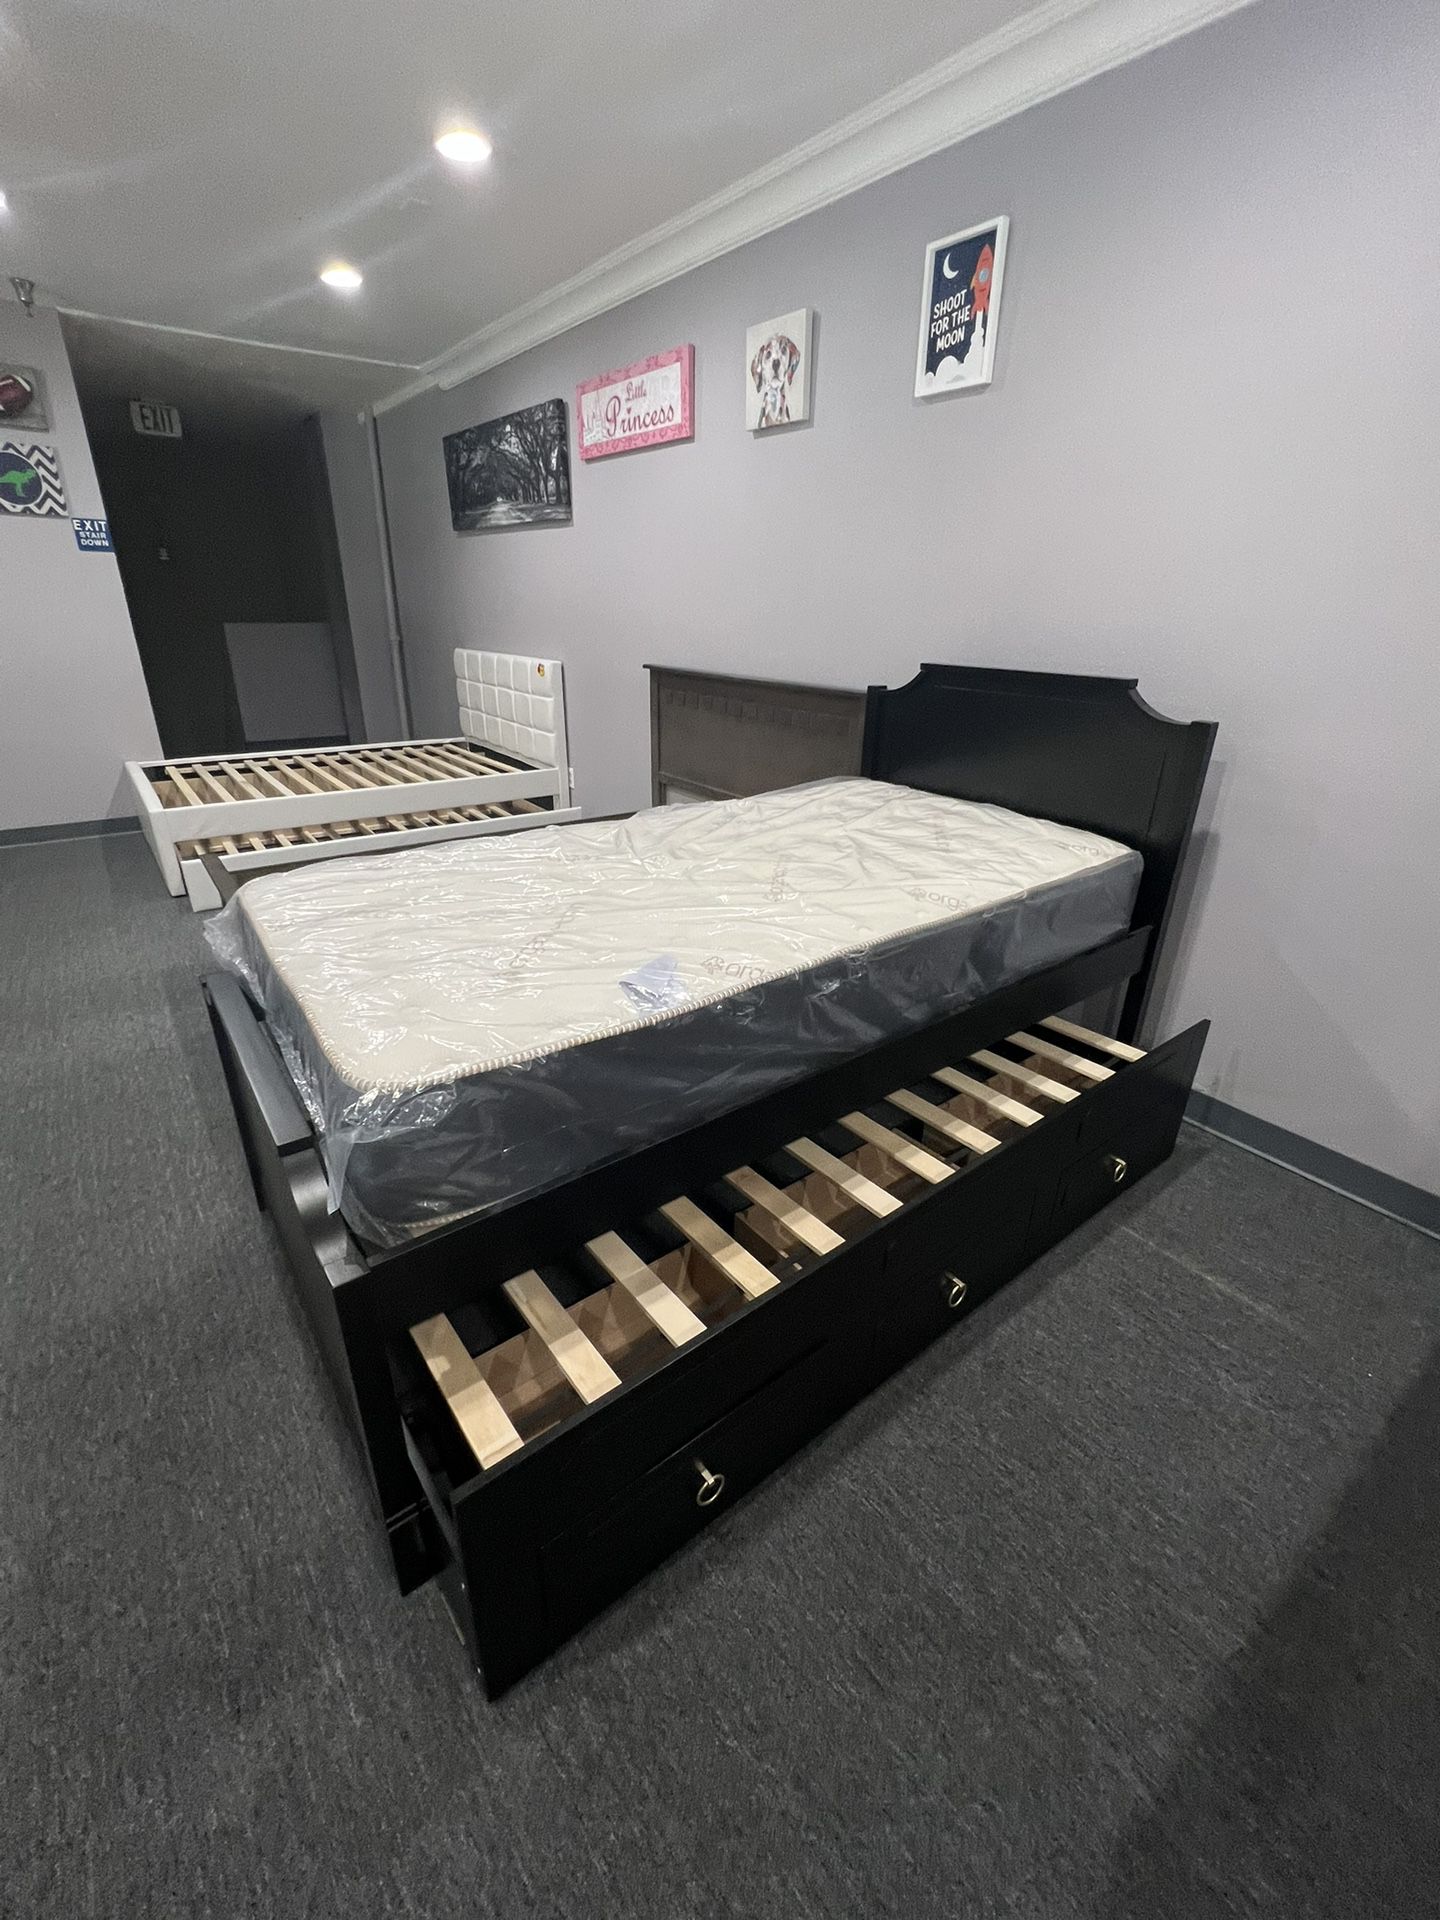 Twin Trundle Bed Frame 